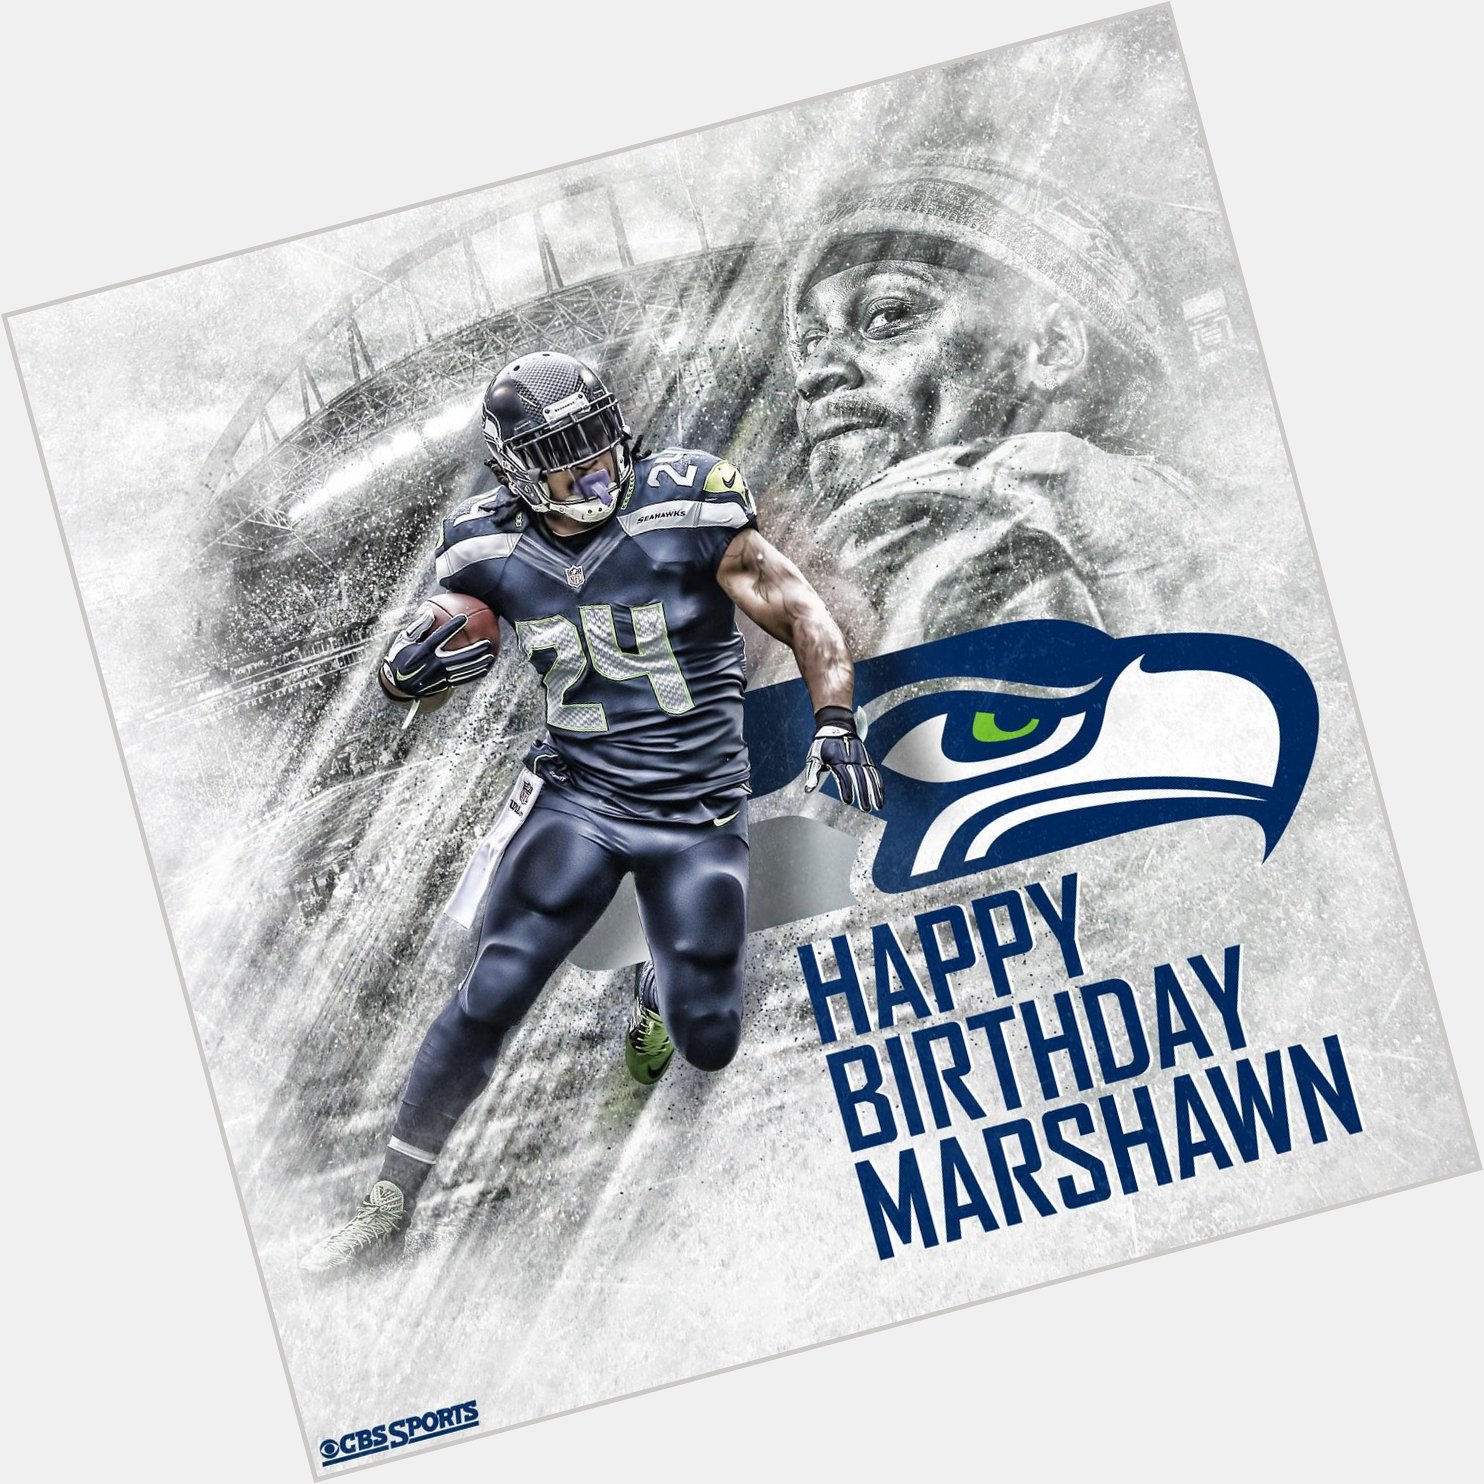 Happy Birthday Marshawn Lynch!

Here\s to hoping the star gets plenty of Skittles at his party. 